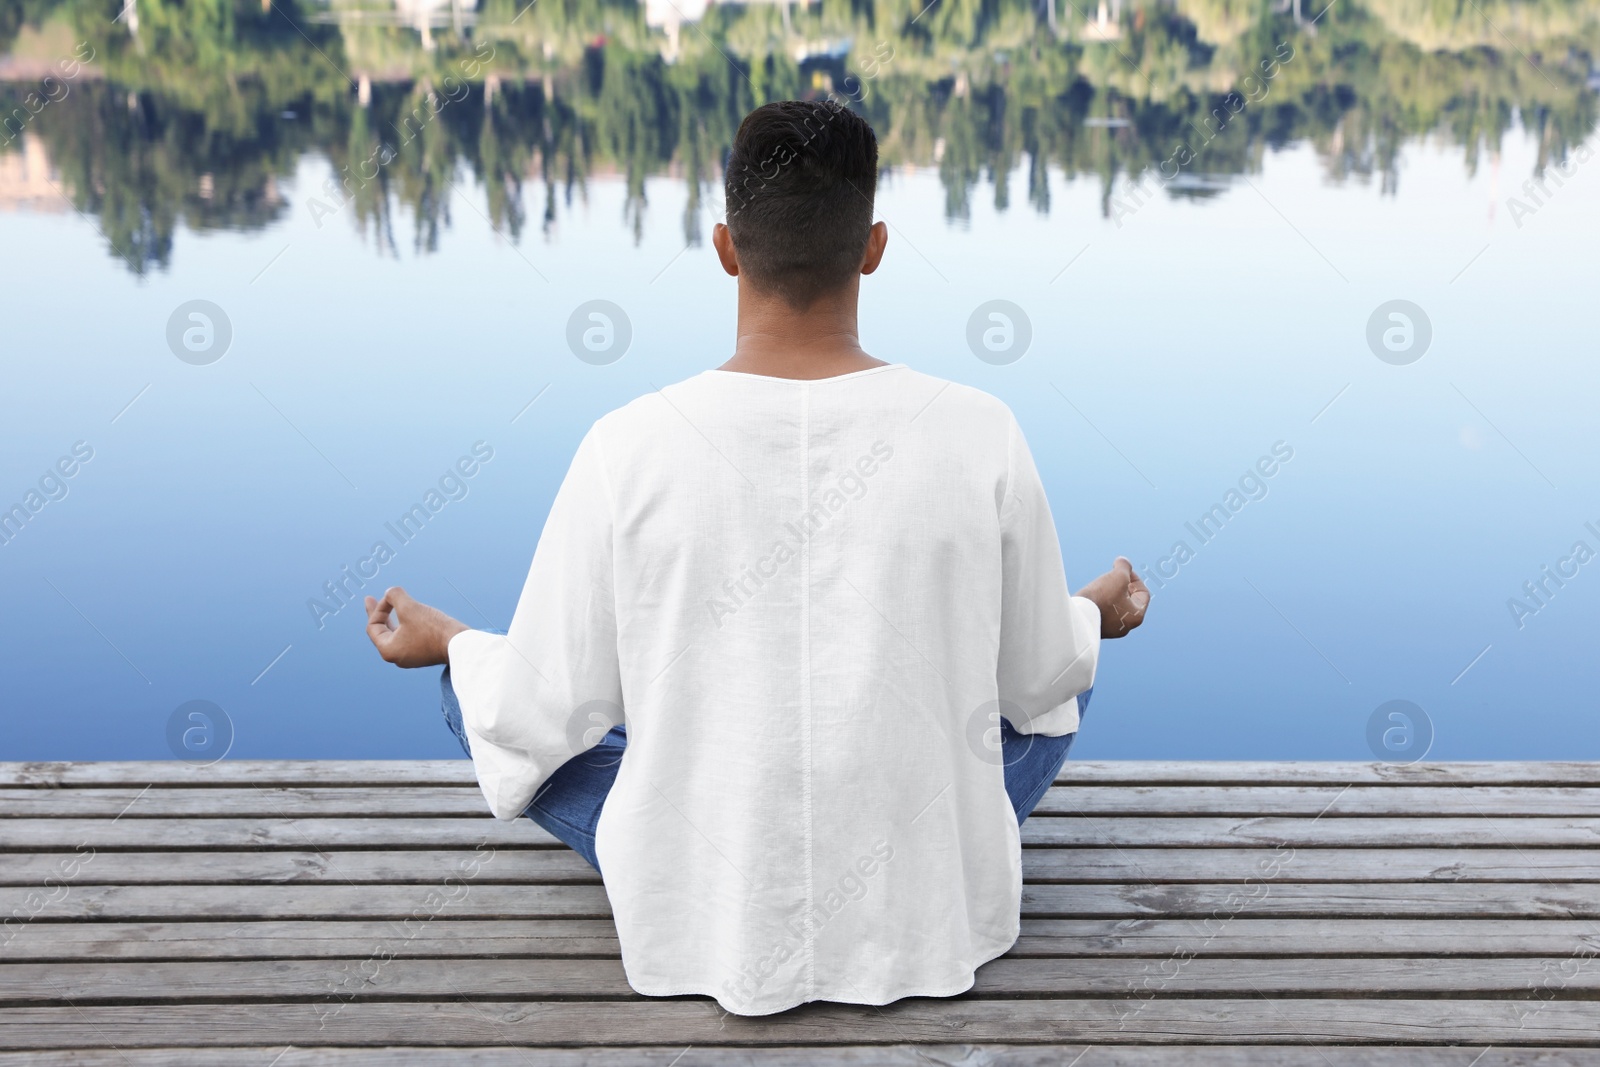 Photo of Man meditating on wooden pier near river, back view